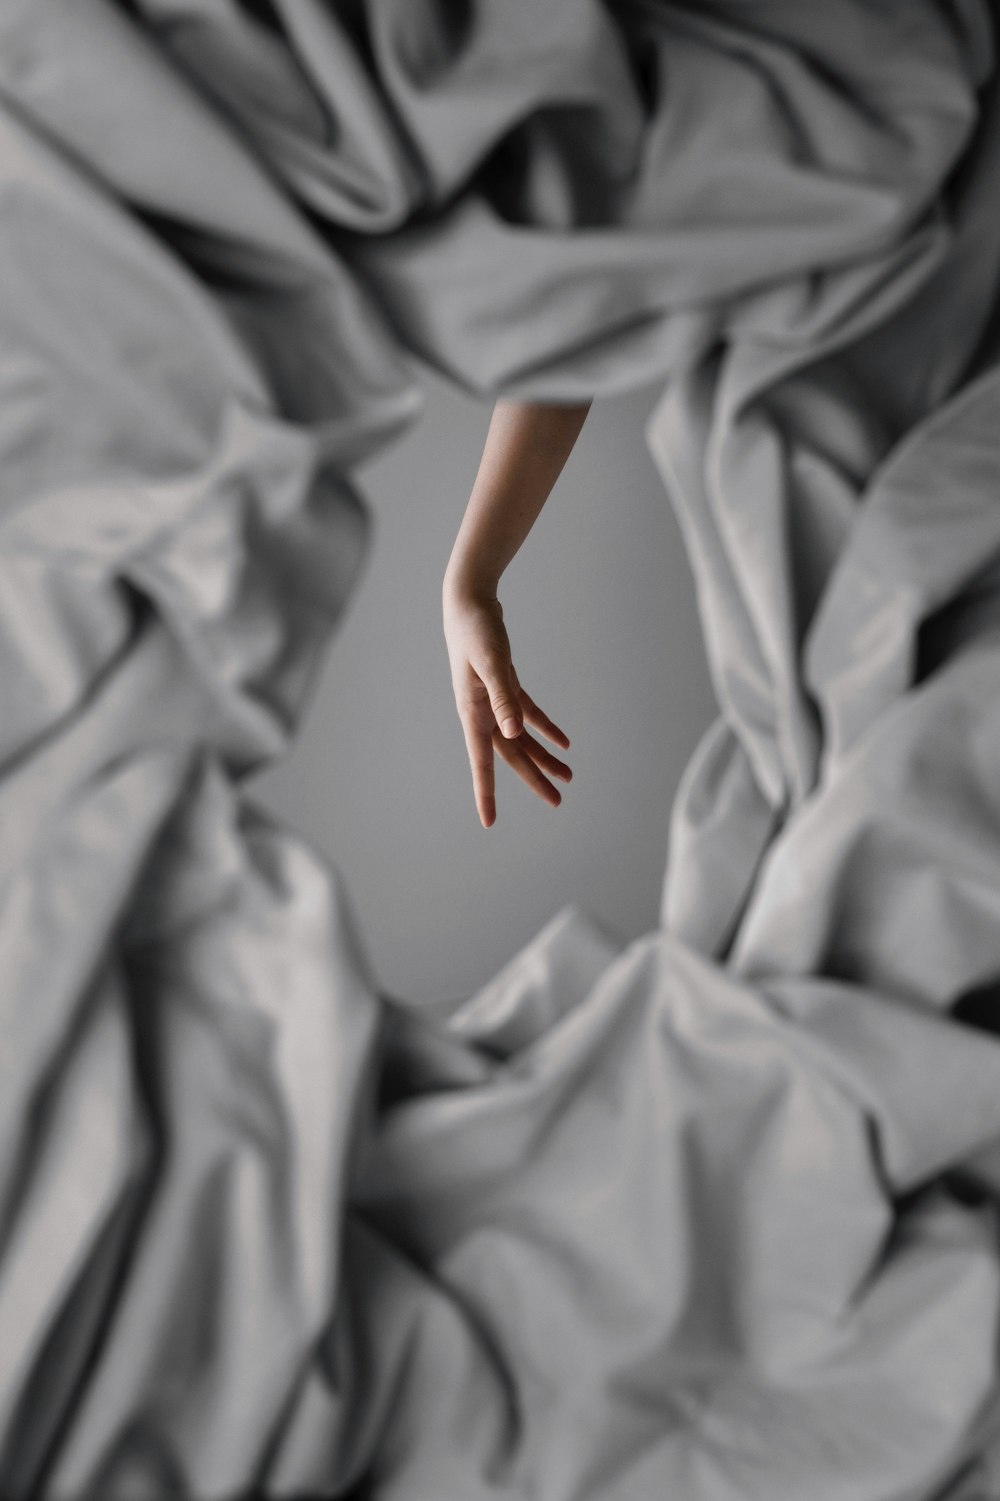 a person's hand reaching out of a blanket